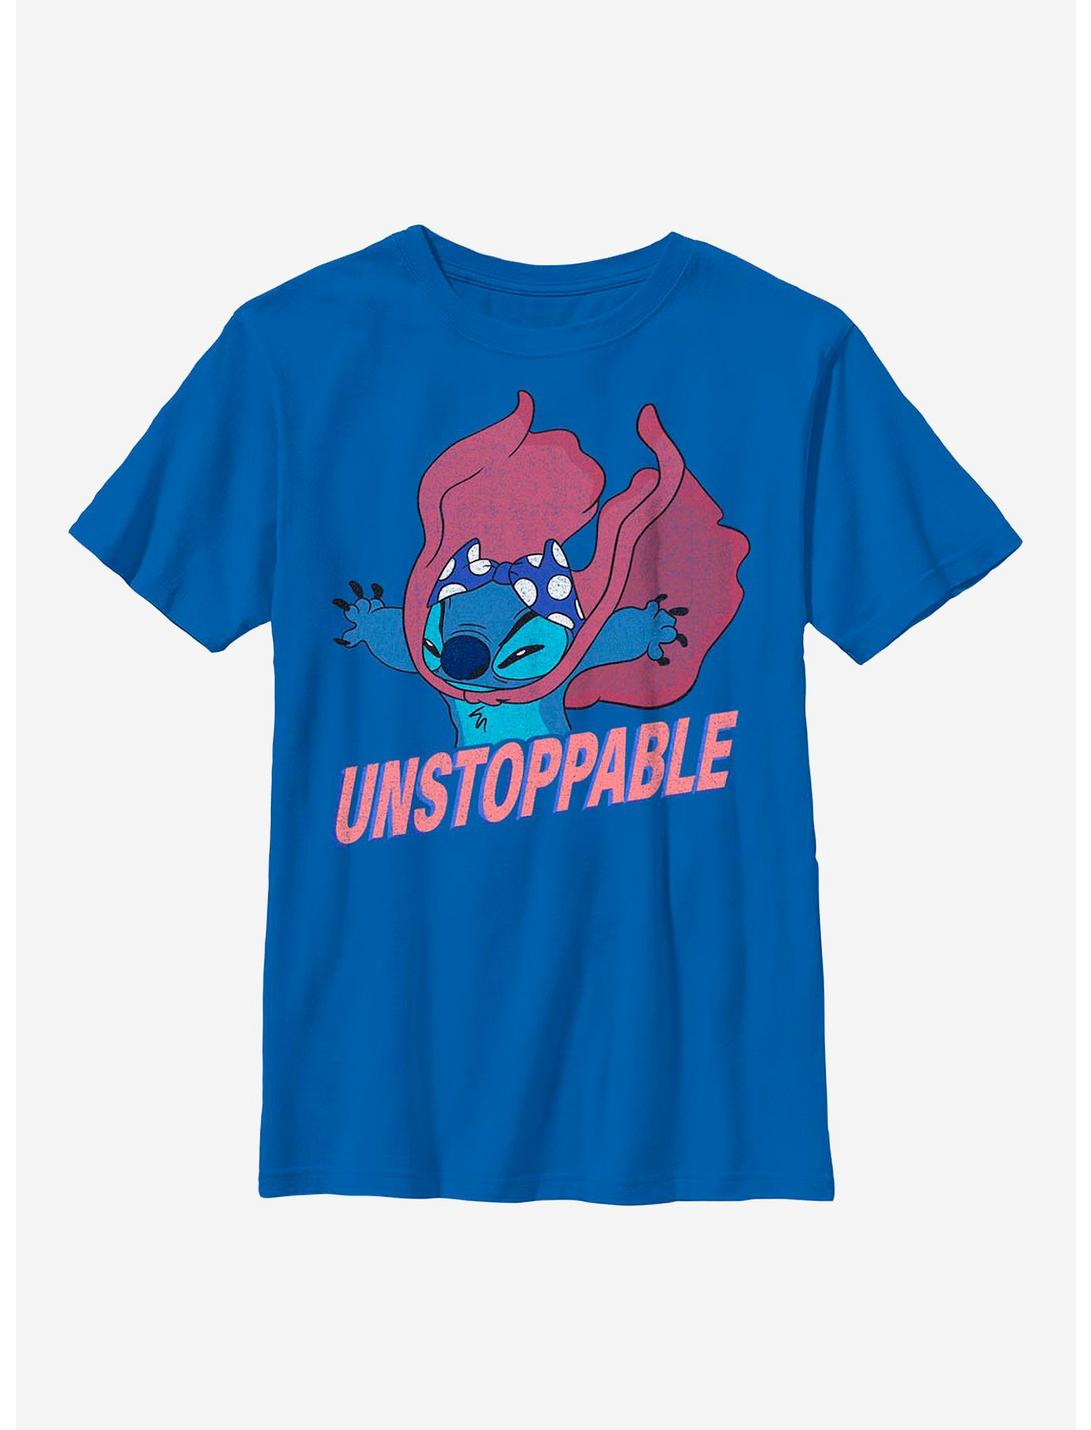 Disney Lilo & Stitch Unstoppable Youth T-Shirt, ROYAL, hi-res